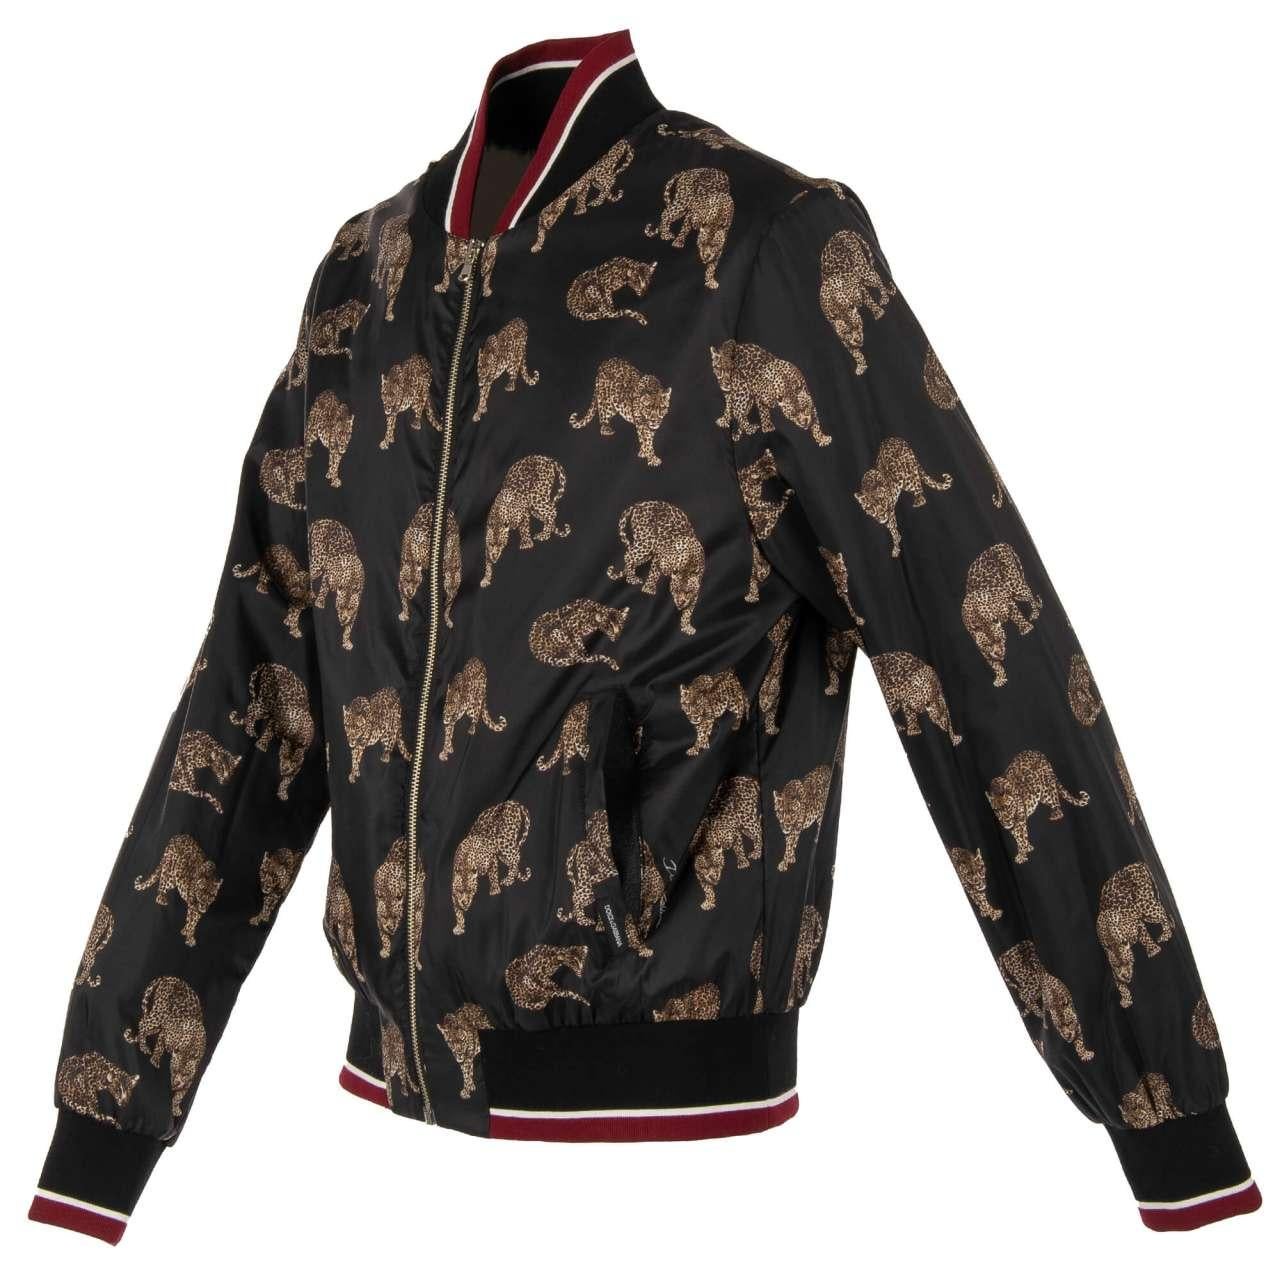 Dolce & Gabbana Leopards Printed Bomber Jacket with Pockets Black Brown 54 In Excellent Condition For Sale In Erkrath, DE